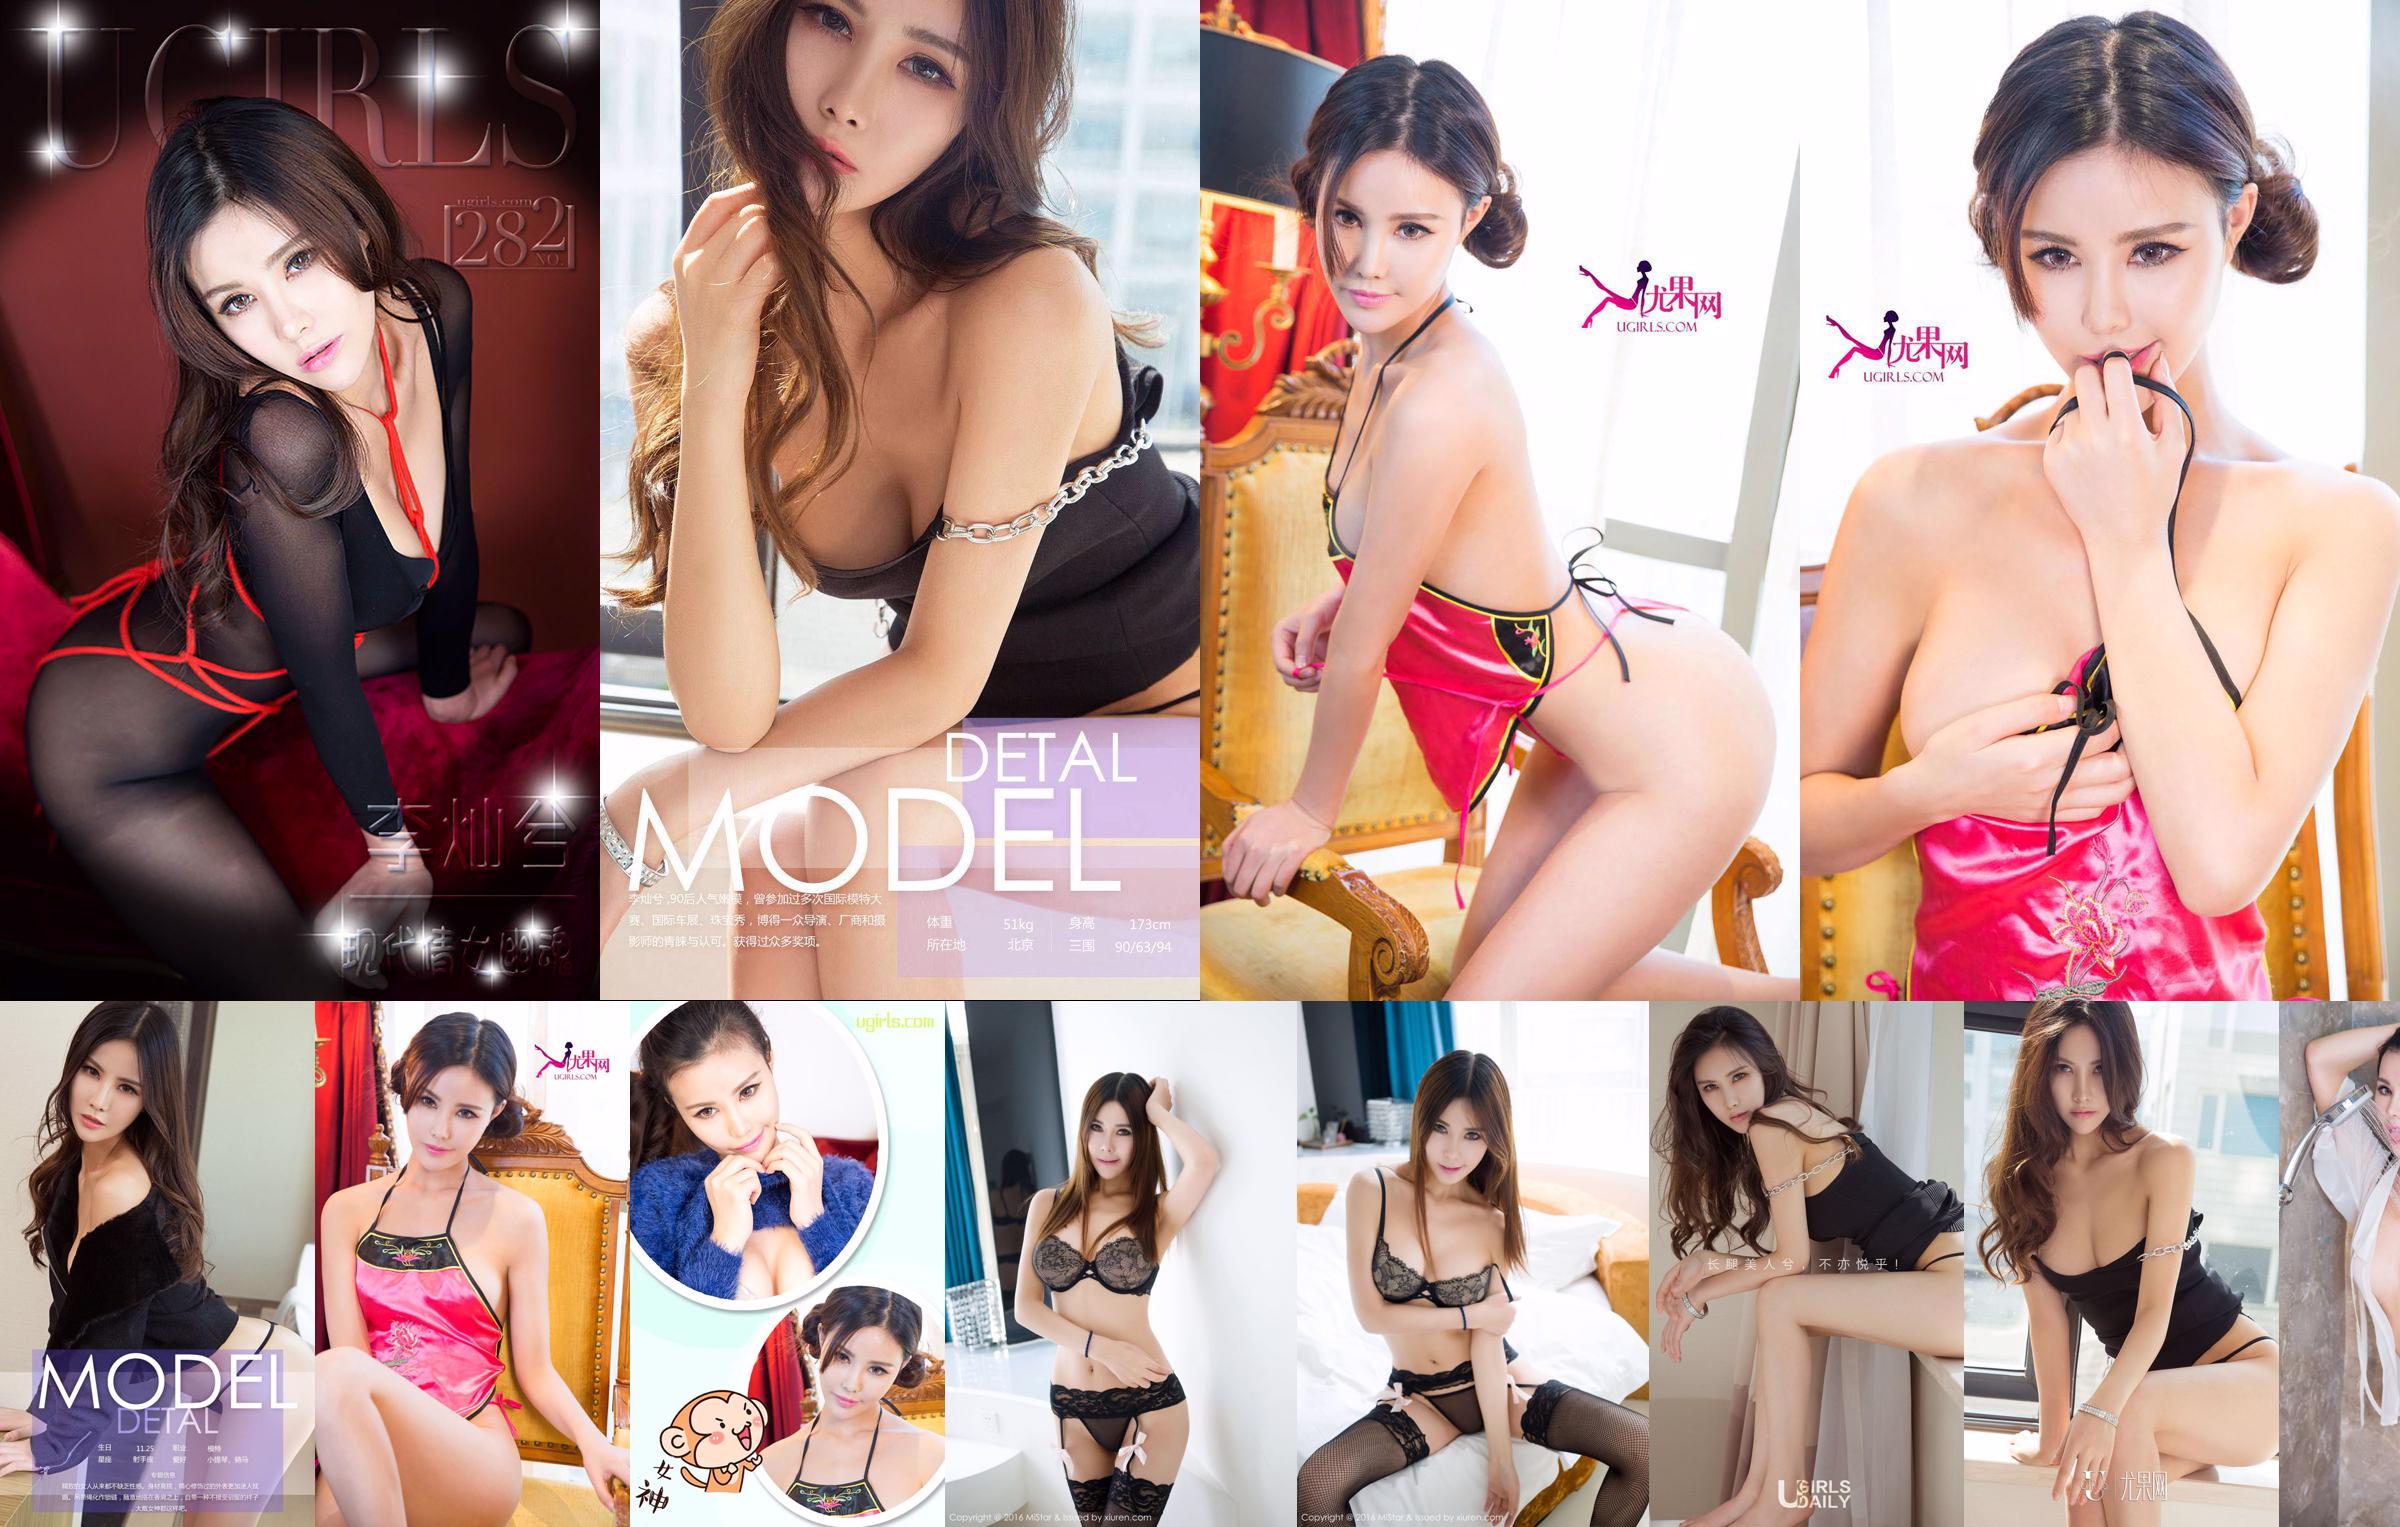 Canxi/Li Canxi "3 sets of sexy lingerie" [MiStar] Vol.097 No.20dfde Page 6